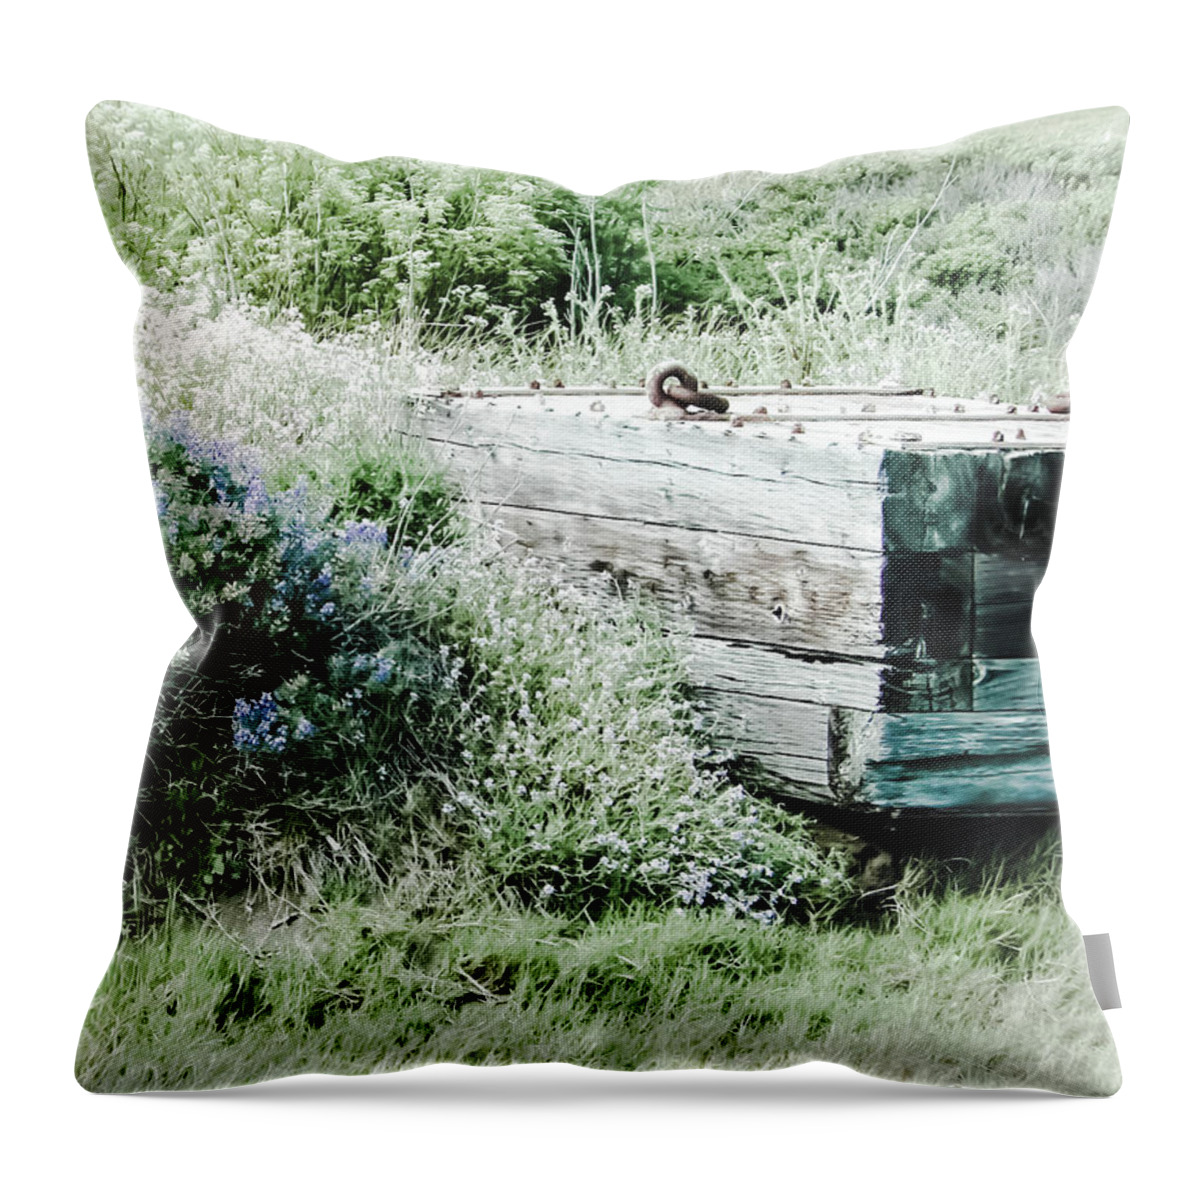 Dry Dock Throw Pillow featuring the photograph Dry Dock by Heather Joyce Morrill